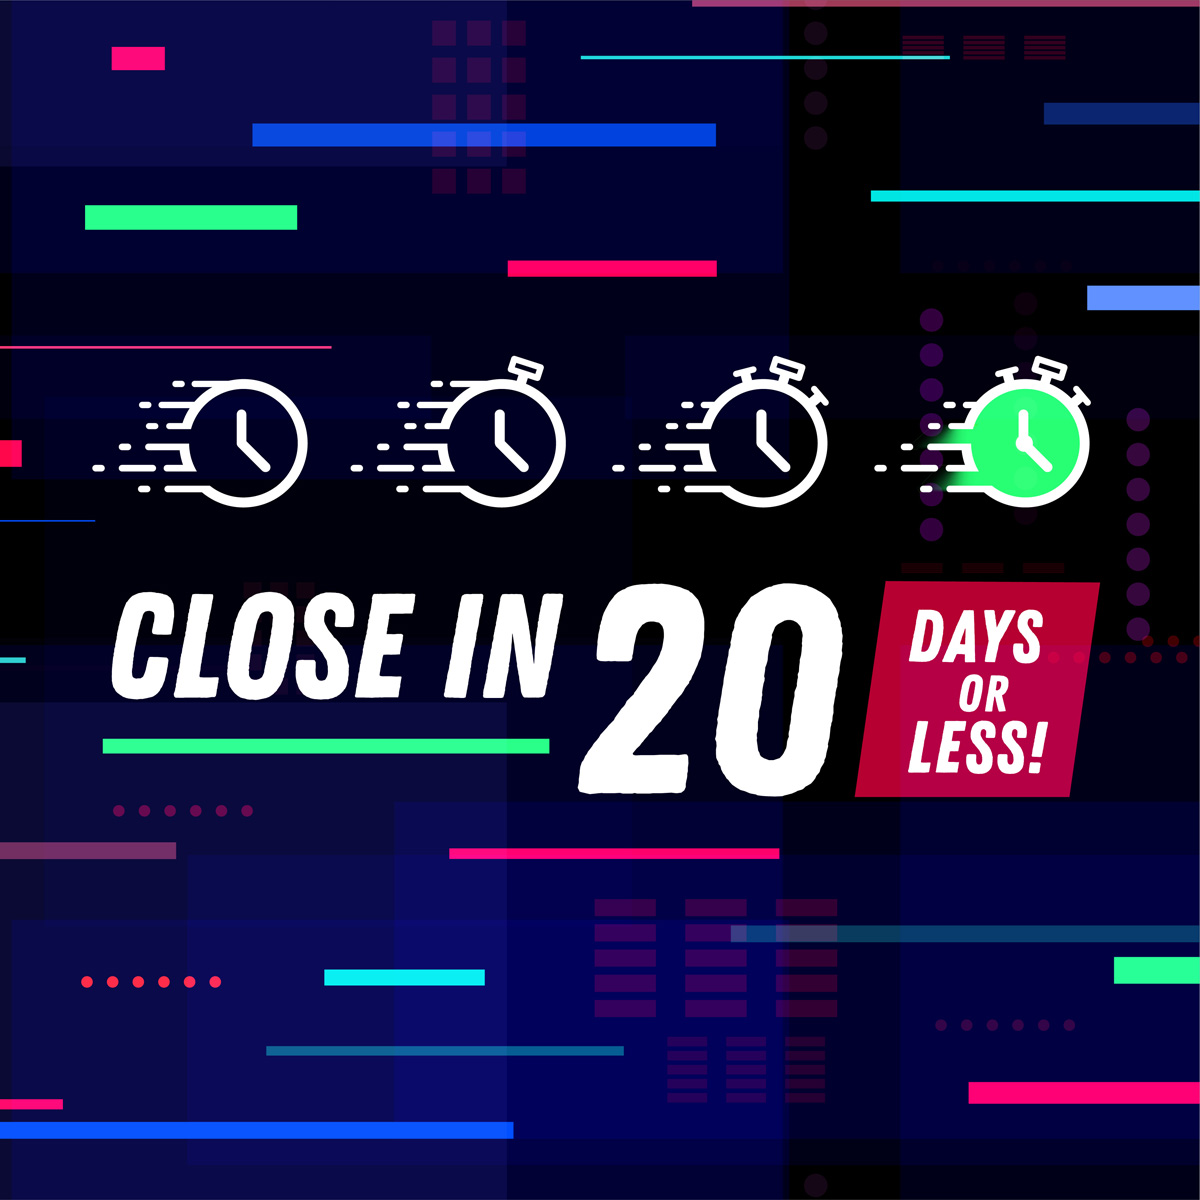 Since most of our loans close in 20 days or less, the journey to your dream home is faster than you think! Experience the broker difference, and get in touch with us today.

#gilbertrealestate #gilberthomesforsale #gilbertaz #gilbertazrealestate #azmortgage #azloanofficer